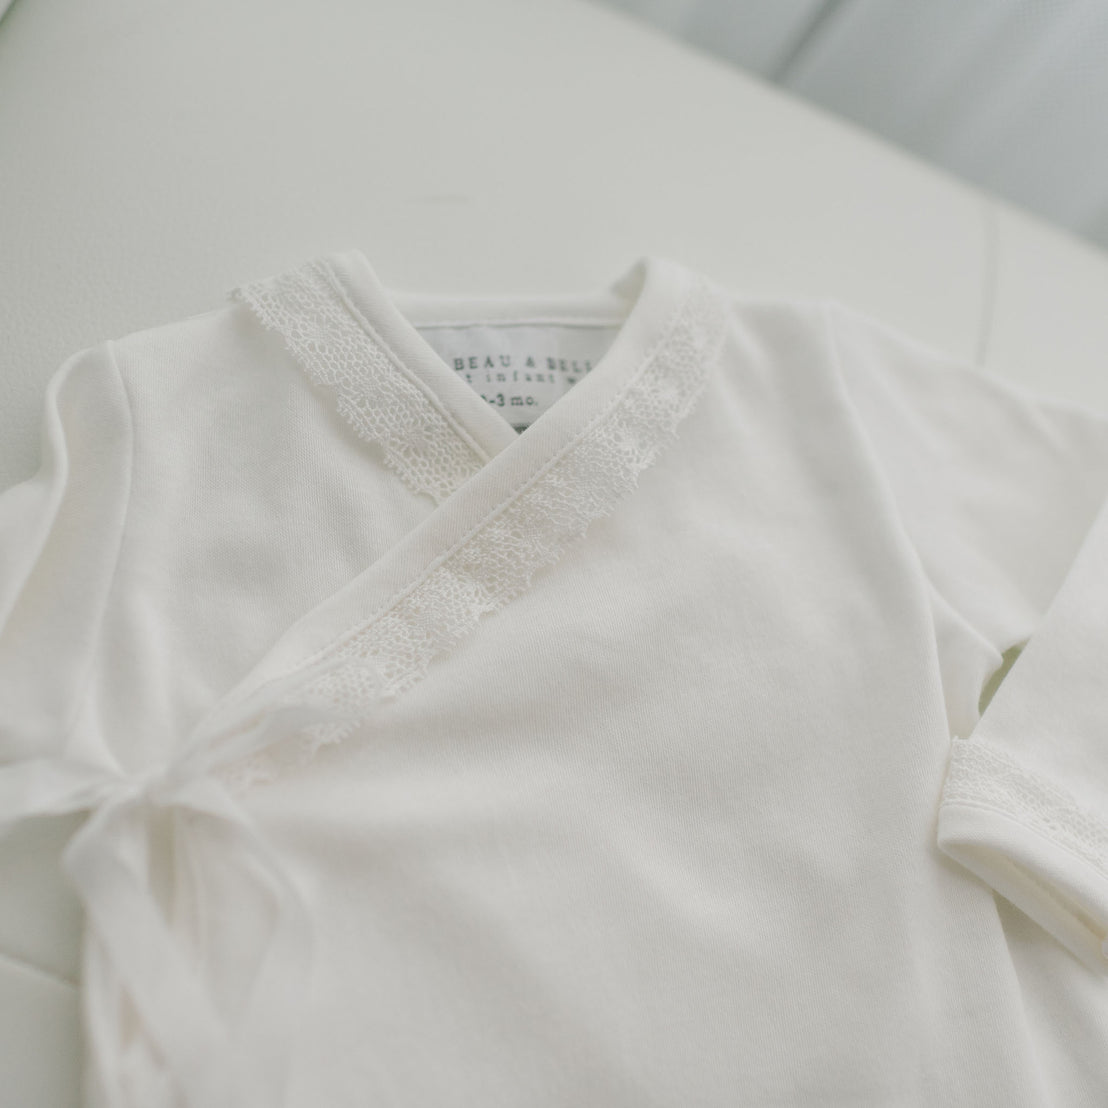 Lace detail on baby cotton gown